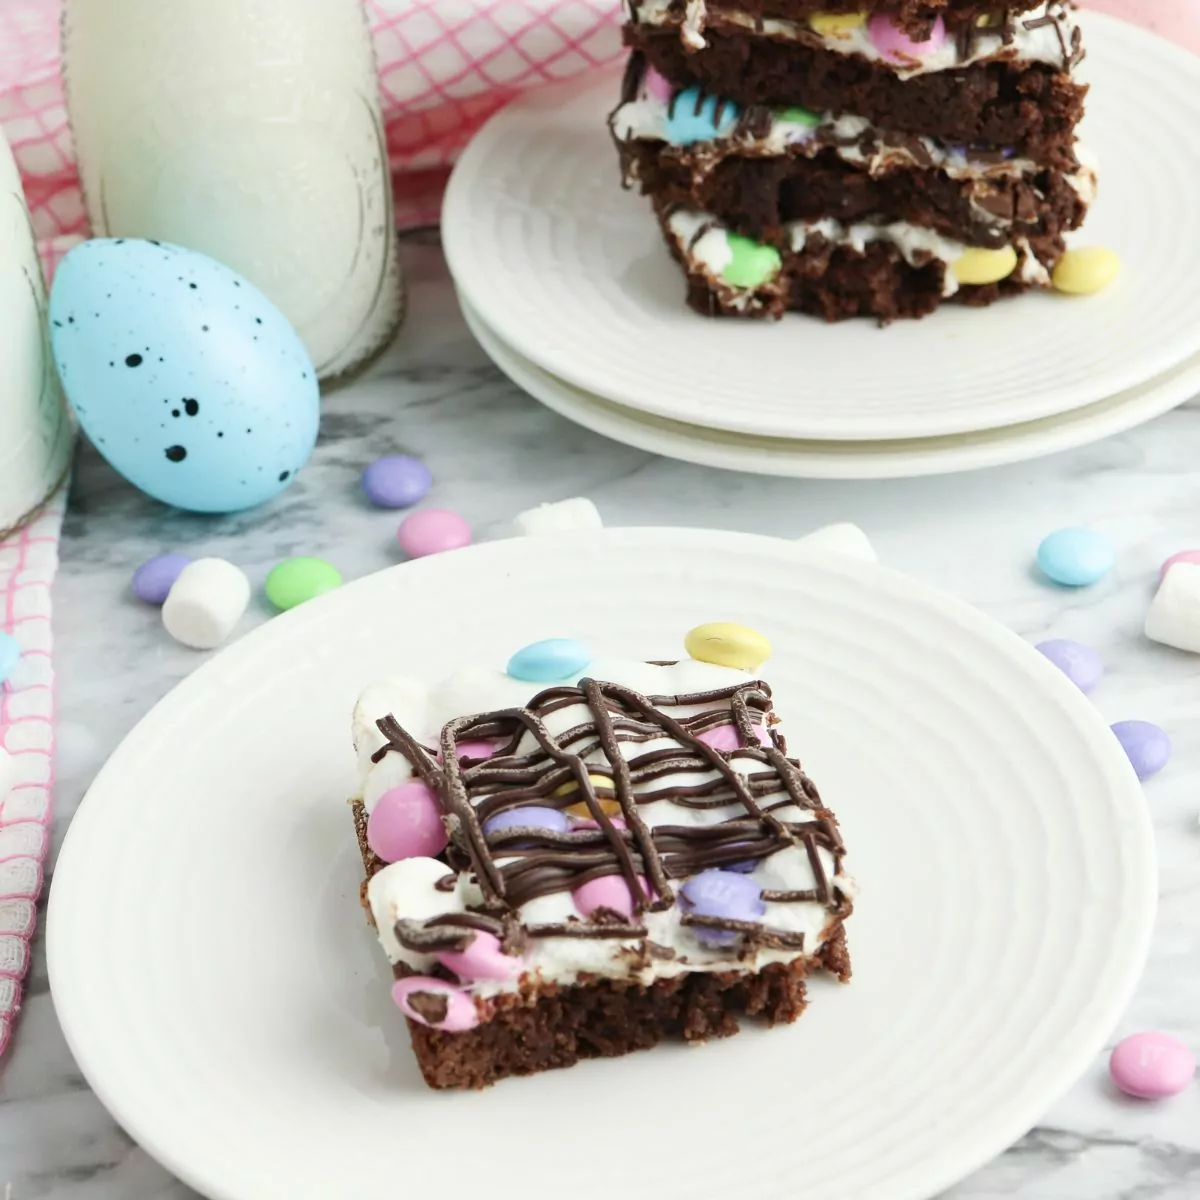 Brownie topped with melted marshmallows, M&Ms, and chocolate drizzle served on a white plate